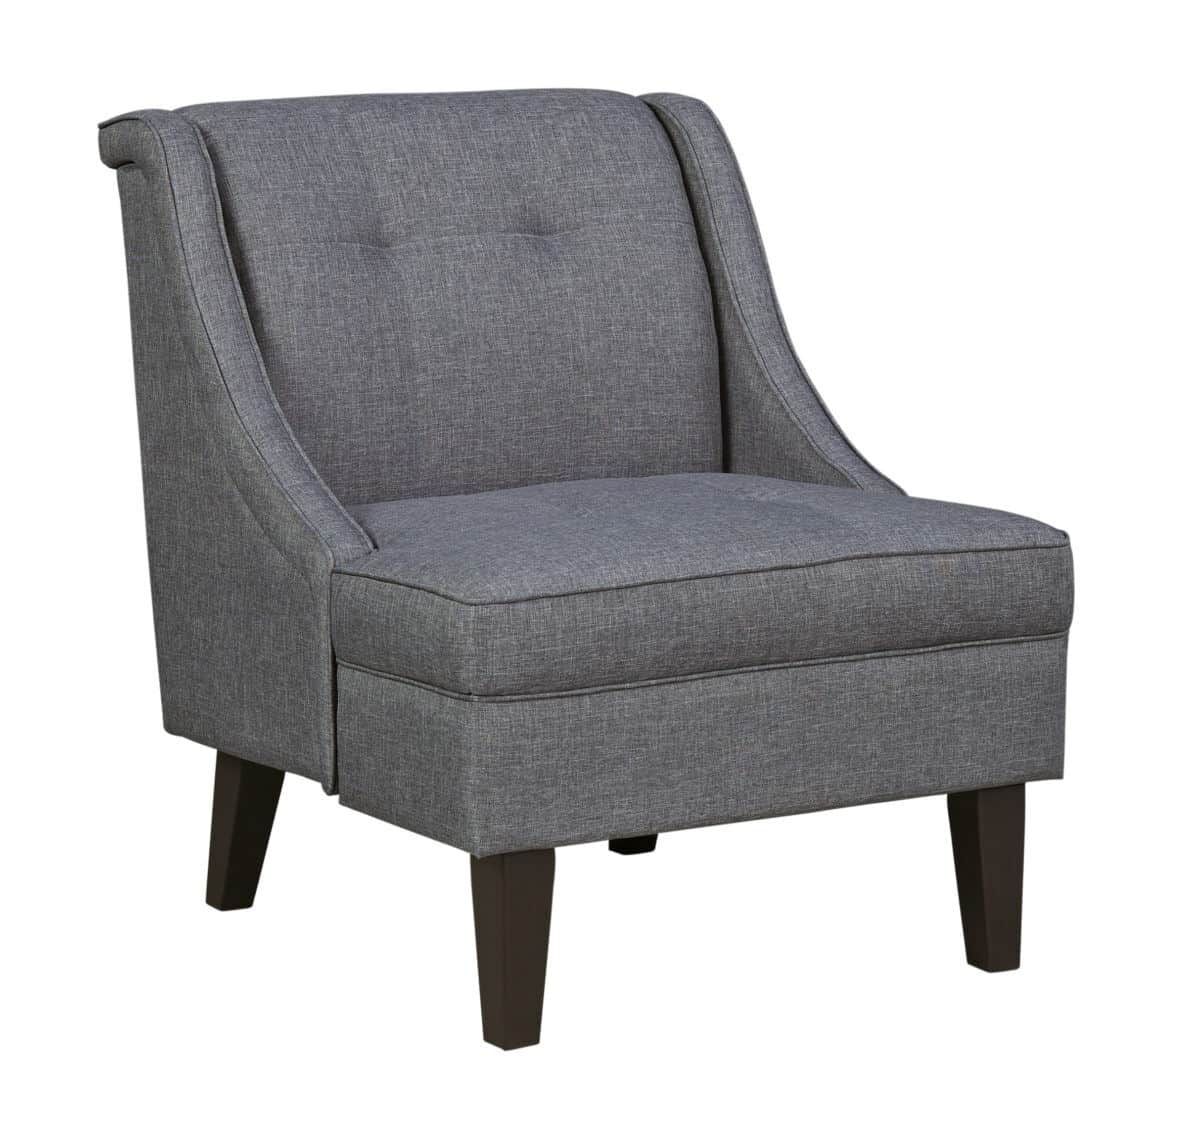 The Calion accent chair's linen-weave upholstery complements so many color schemes.